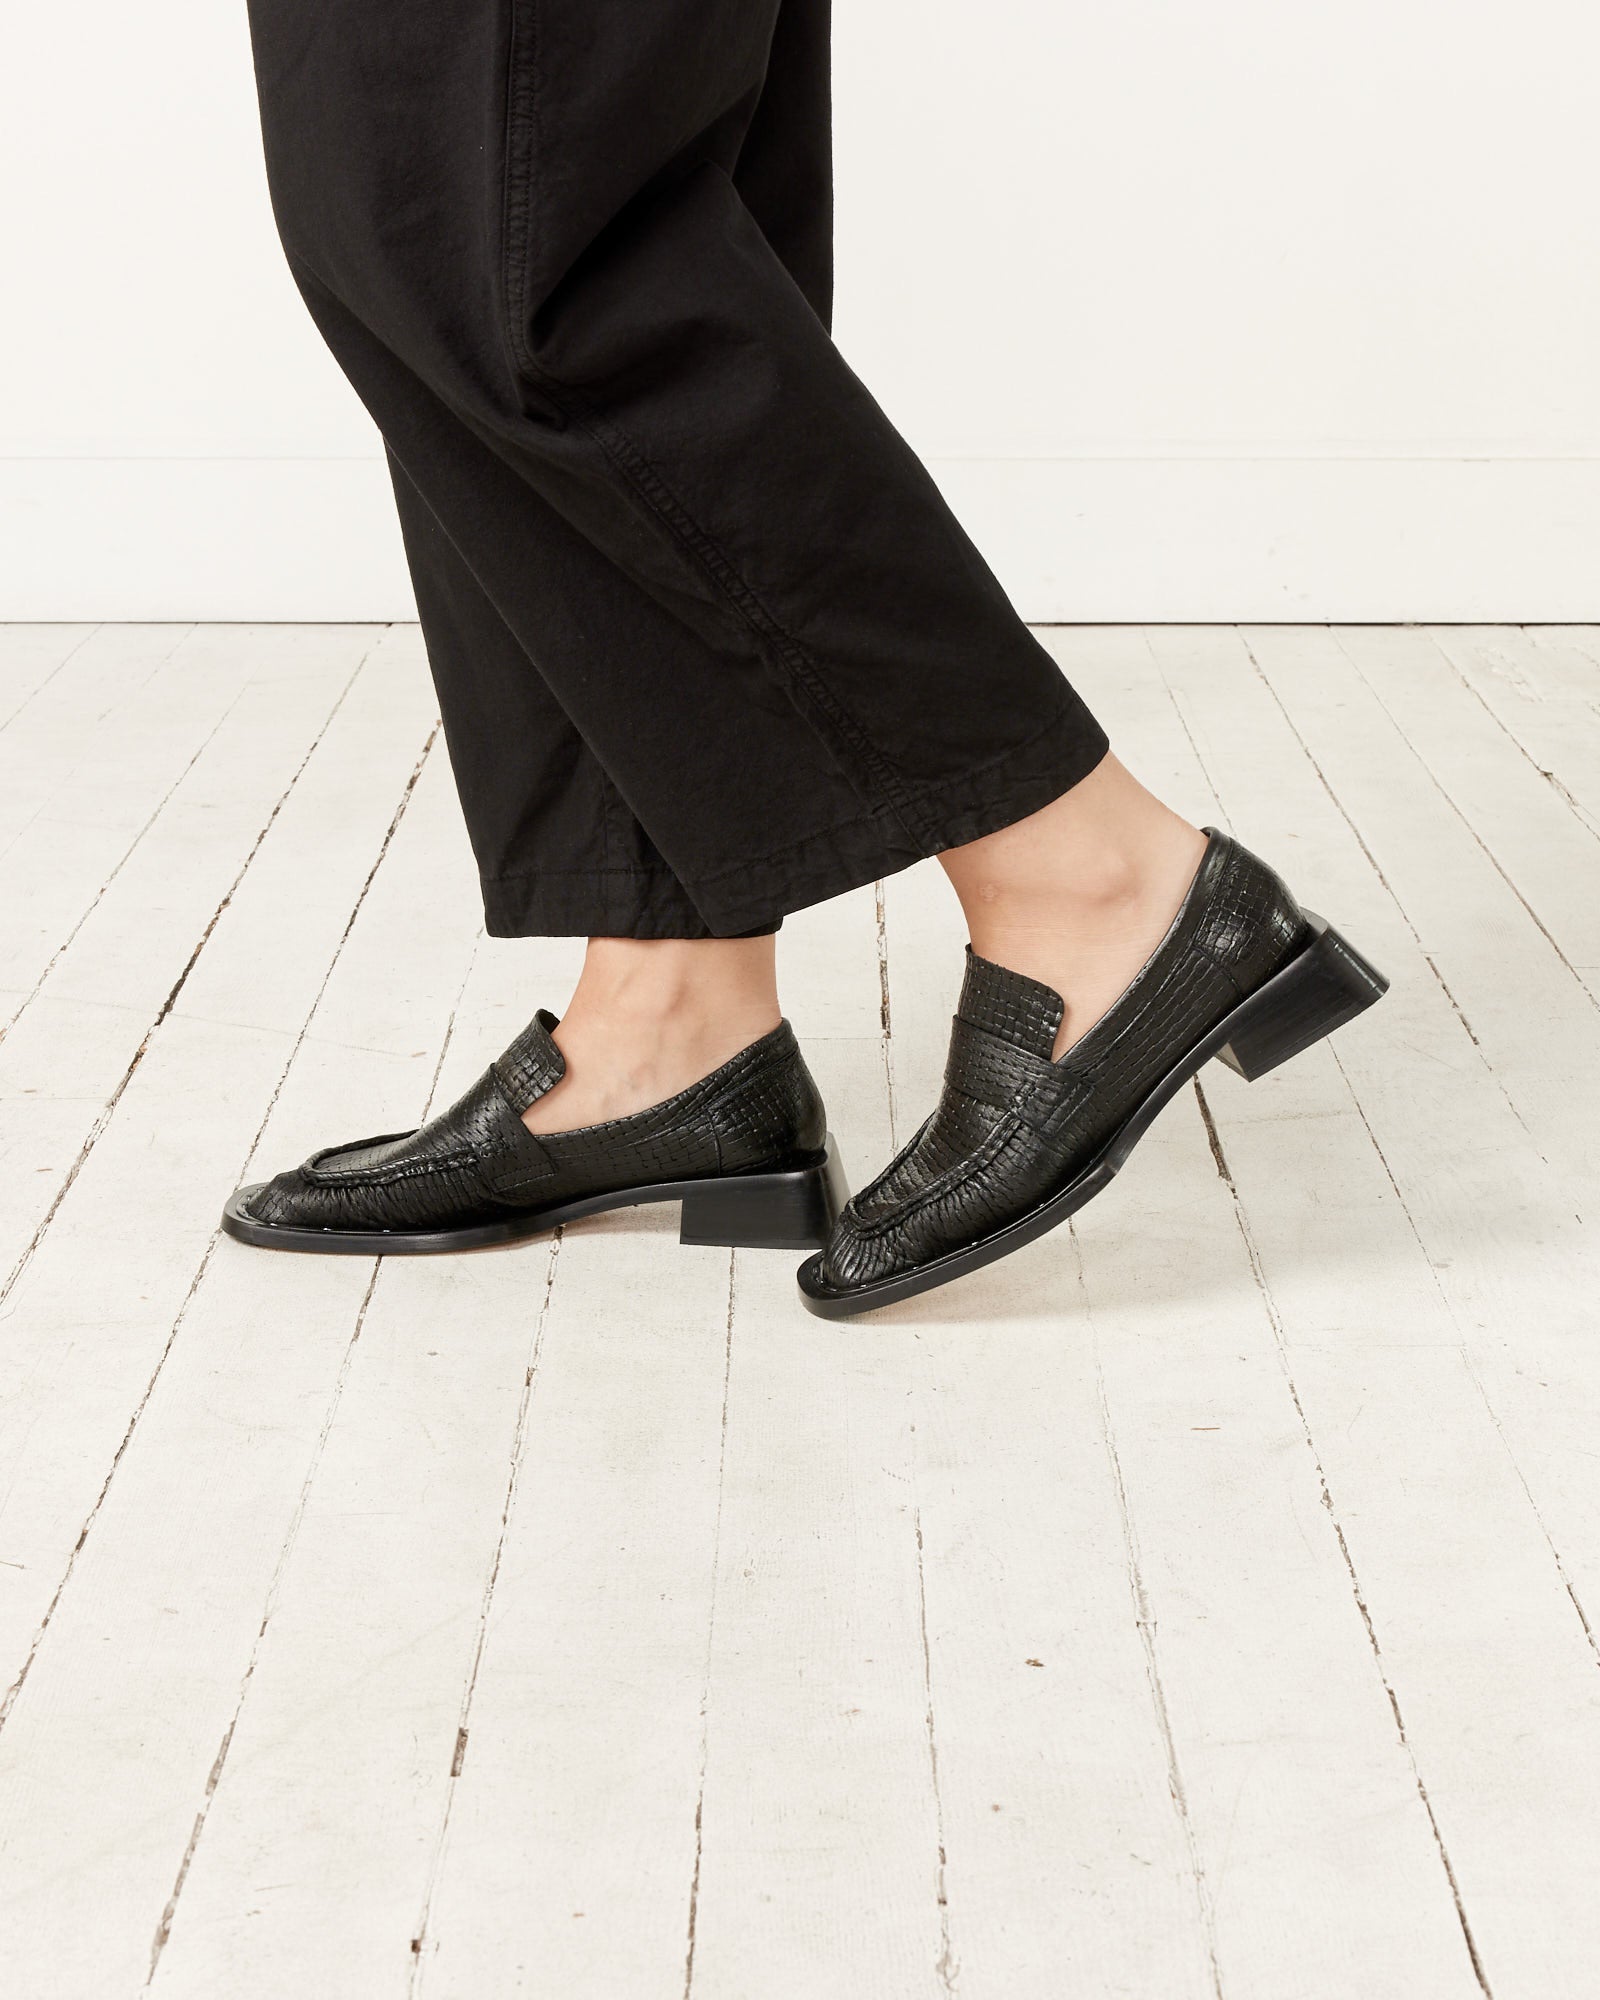 Airi Loafers in Black